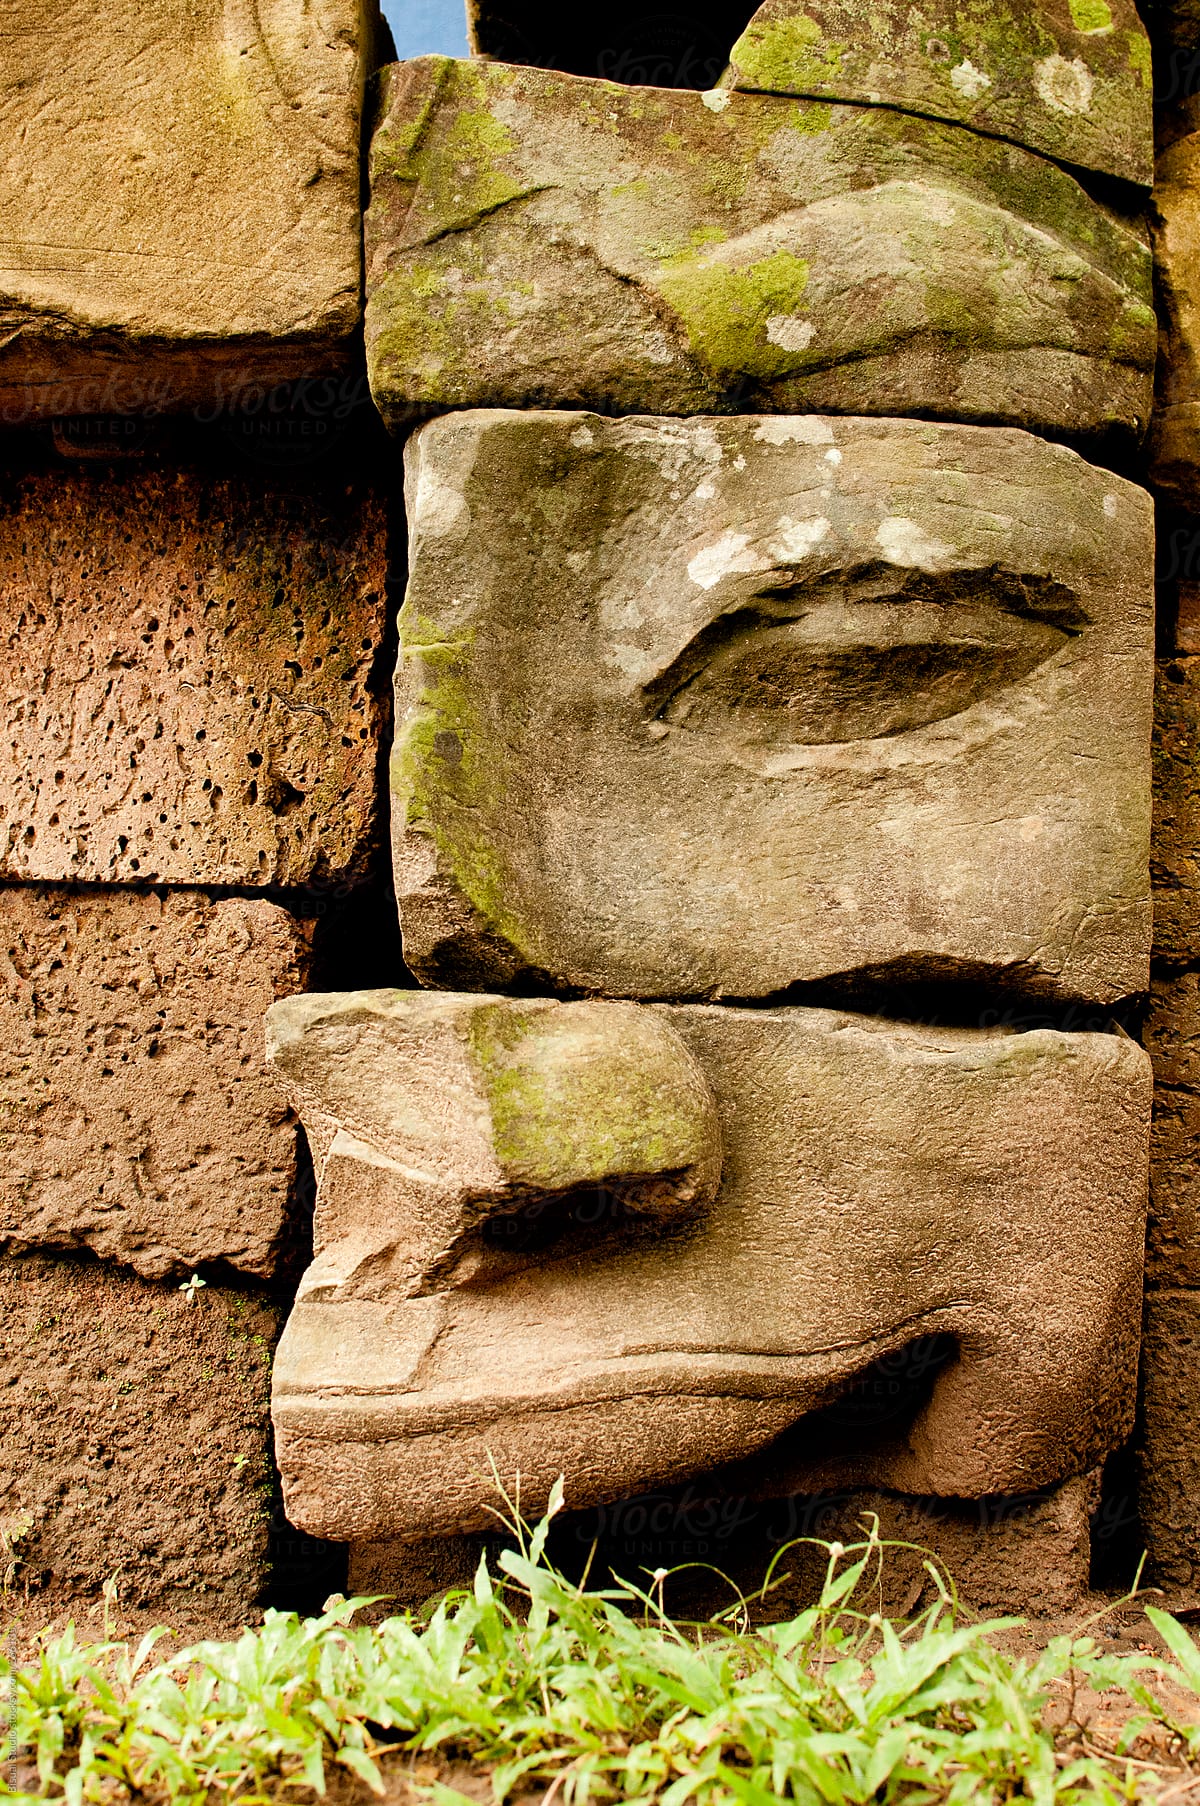 Face in ruins in Angkor